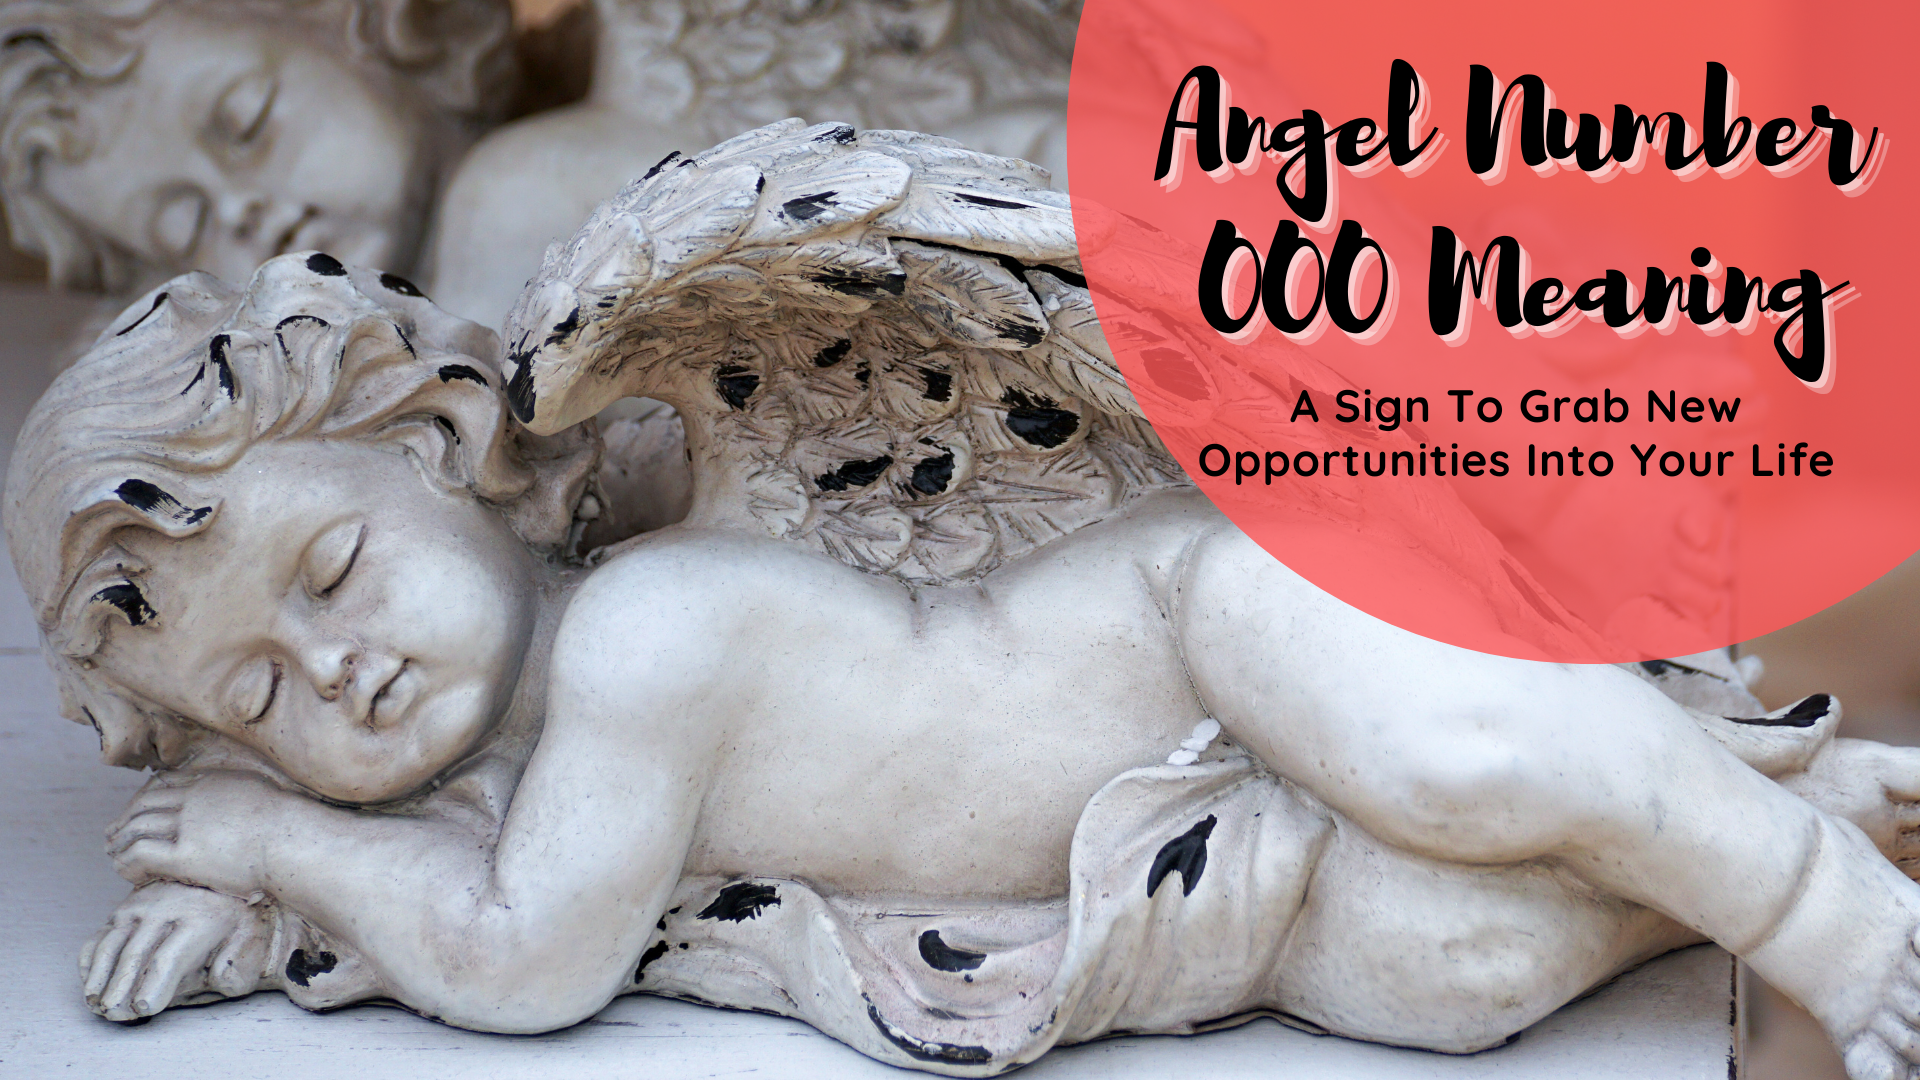 Angel Number 000 Meaning - A Sign To Grab New Opportunities Into Your Life